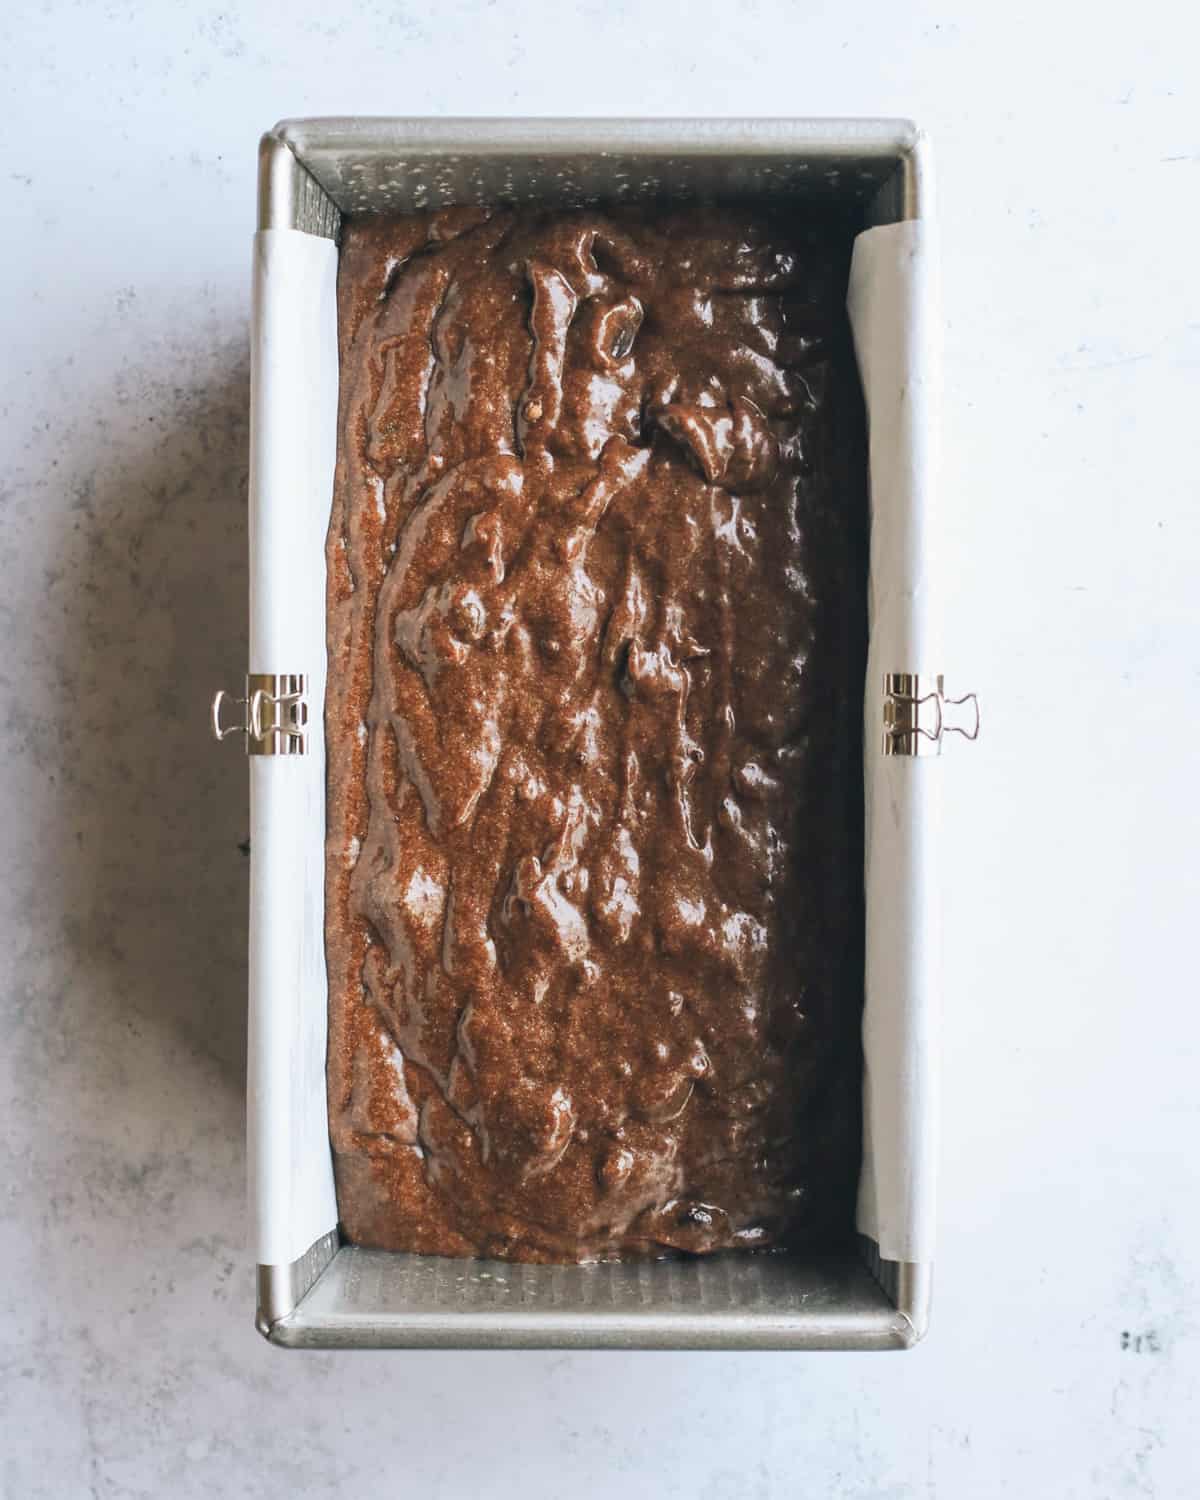 How to Make Chocolate Banana Bread - batter poured into baking pan